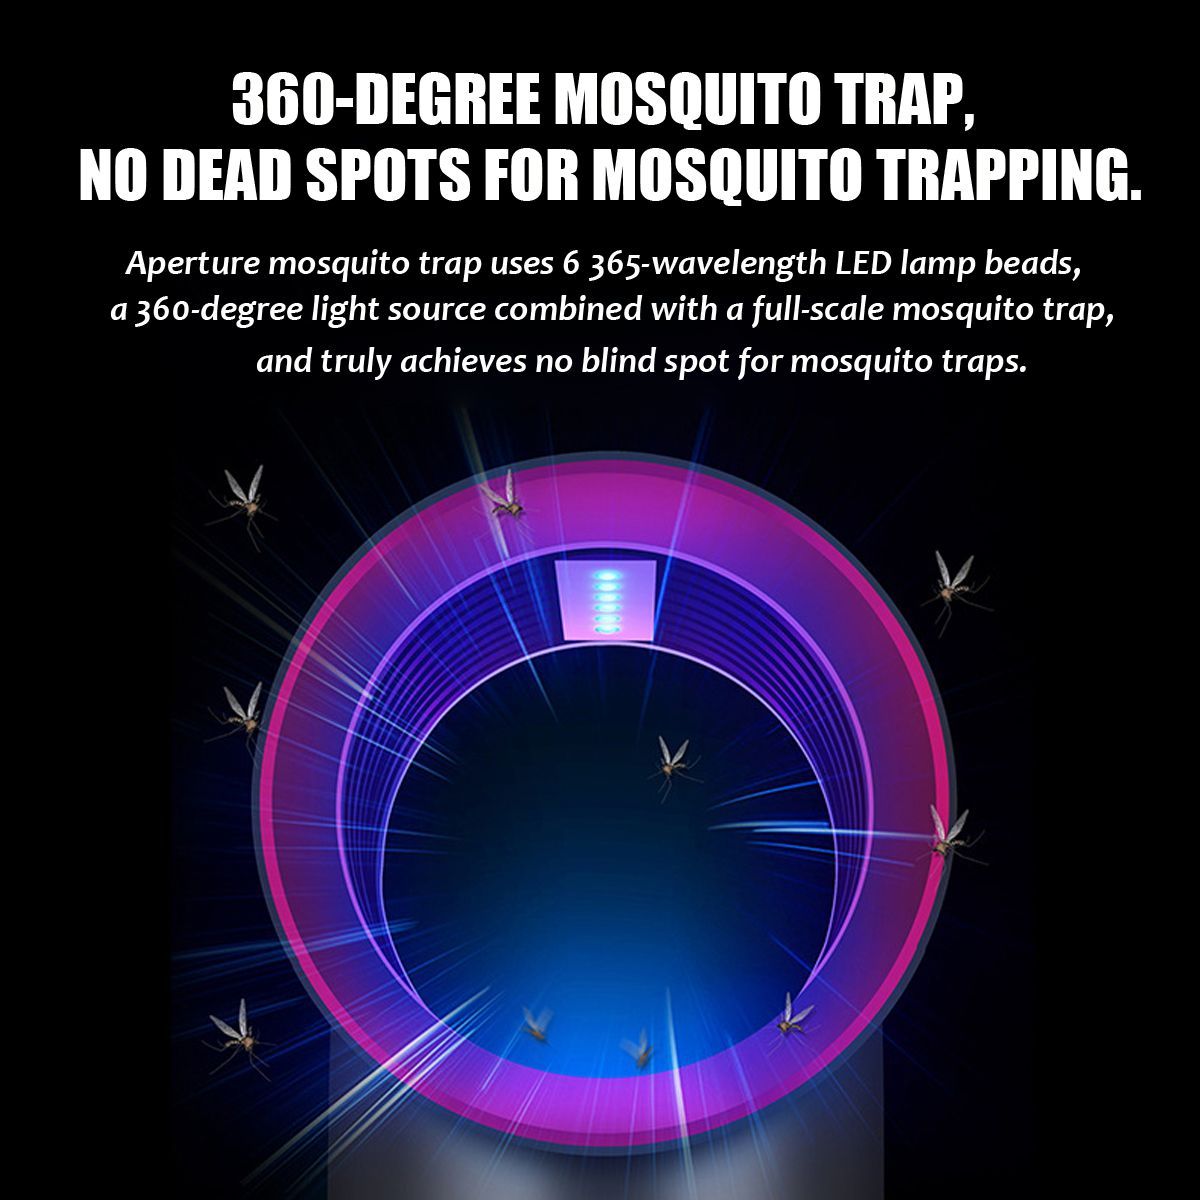 USB-Photocatalyst-Bait-Mosquito-Killer-Insect-Killer-Lamp-Mosquito-Catcher-Trap-1644749